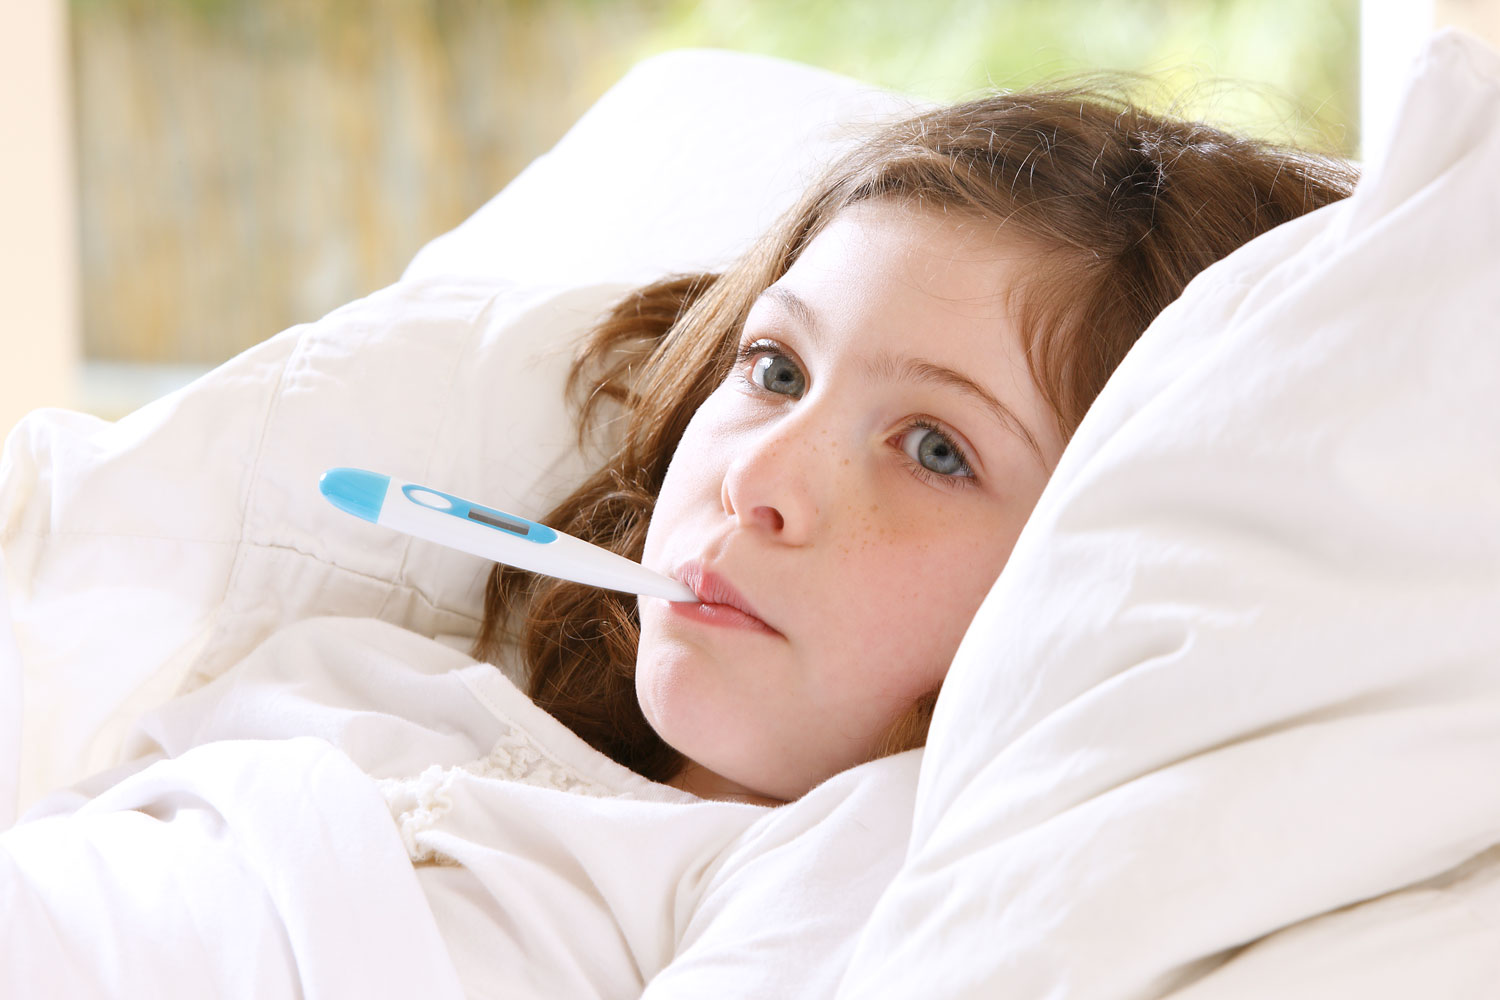 Girl in bed with thermometer in mouth